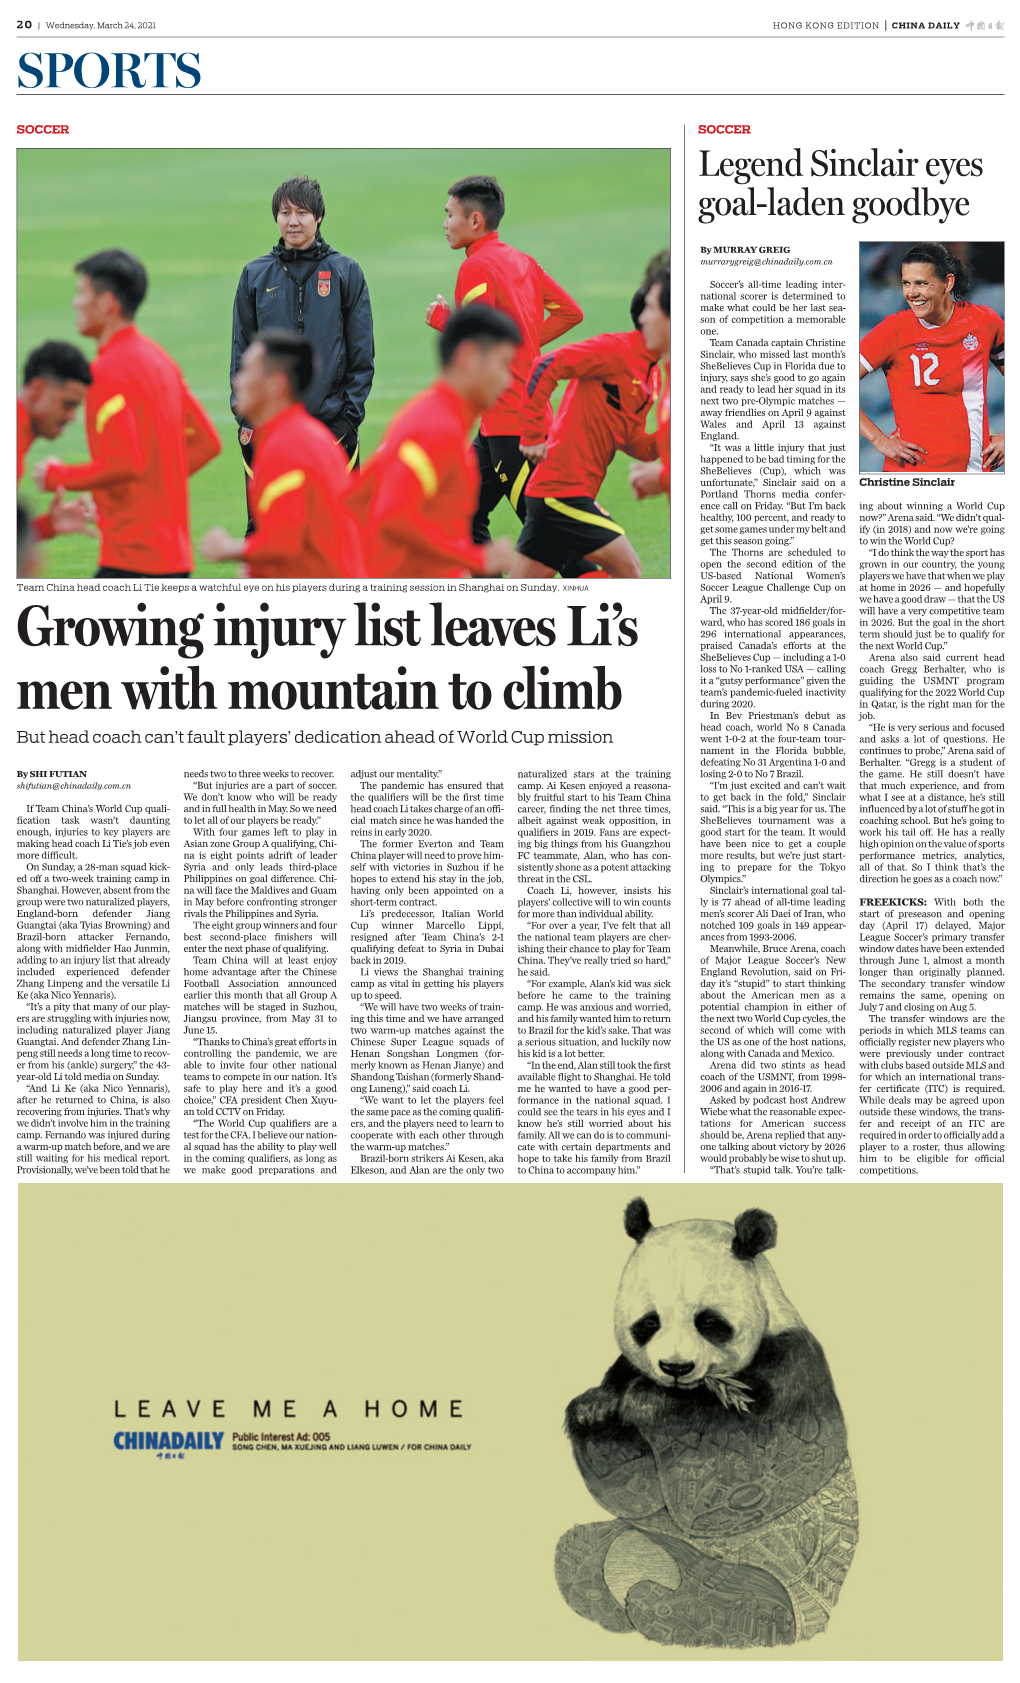 Growing Injury List Leaves Li's Men with Mountain to Climb